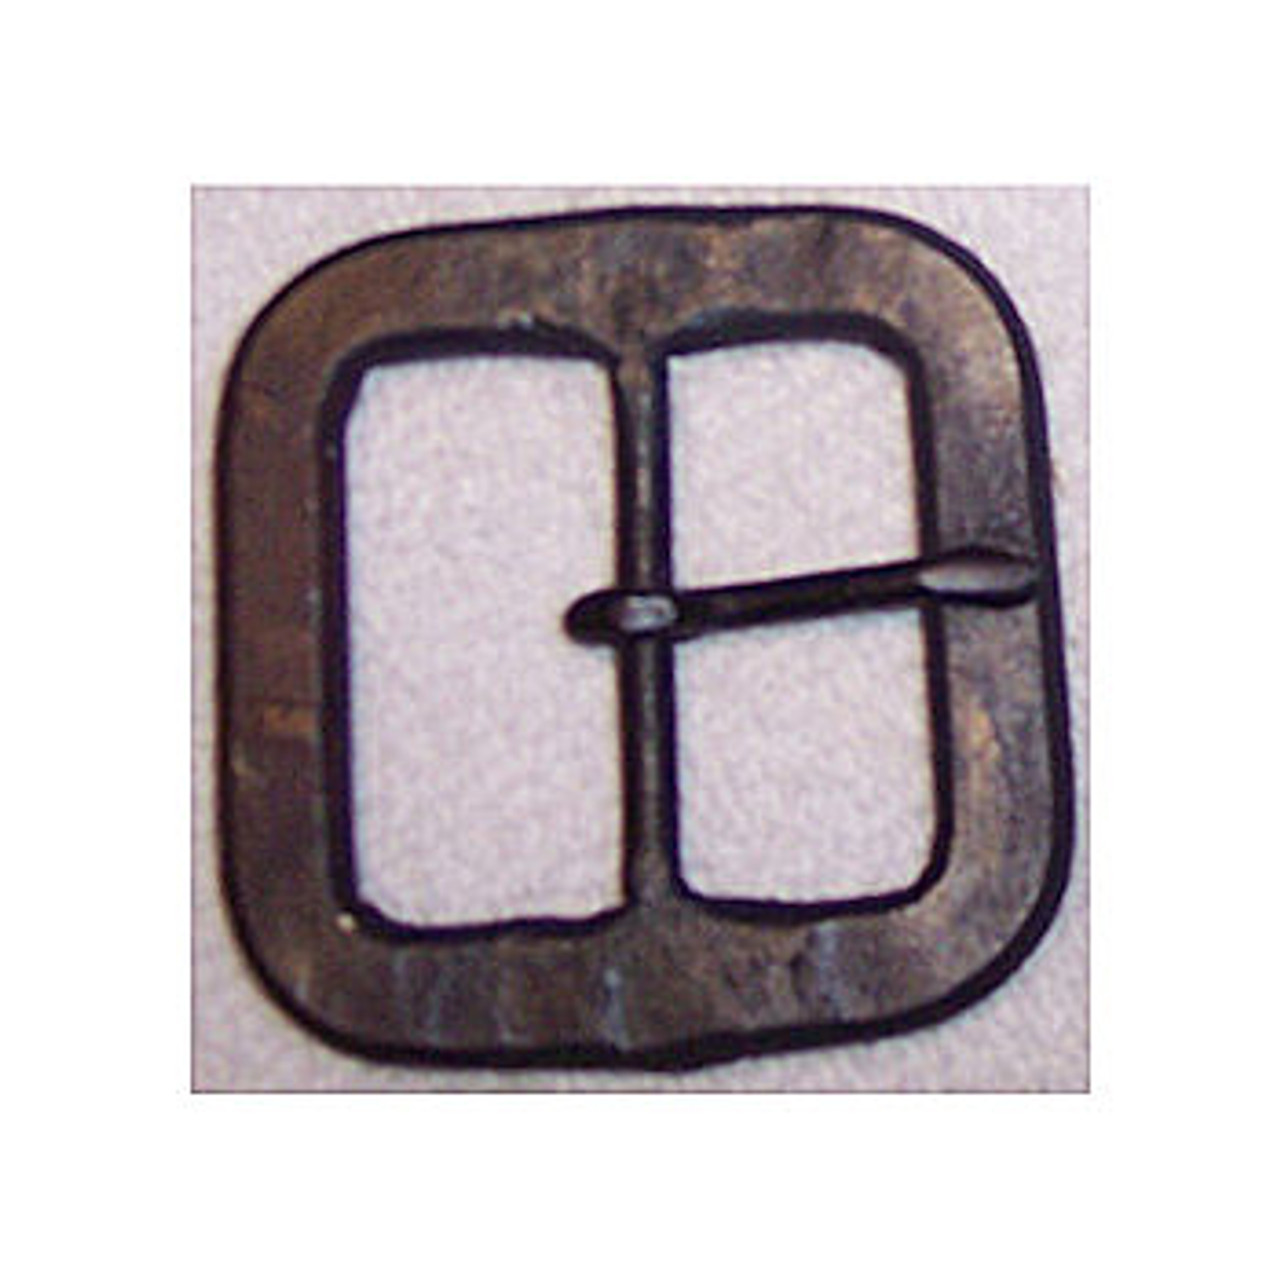 Hand Forged Square Buckles - Iron Belt Buckle - Square Belt Buckle